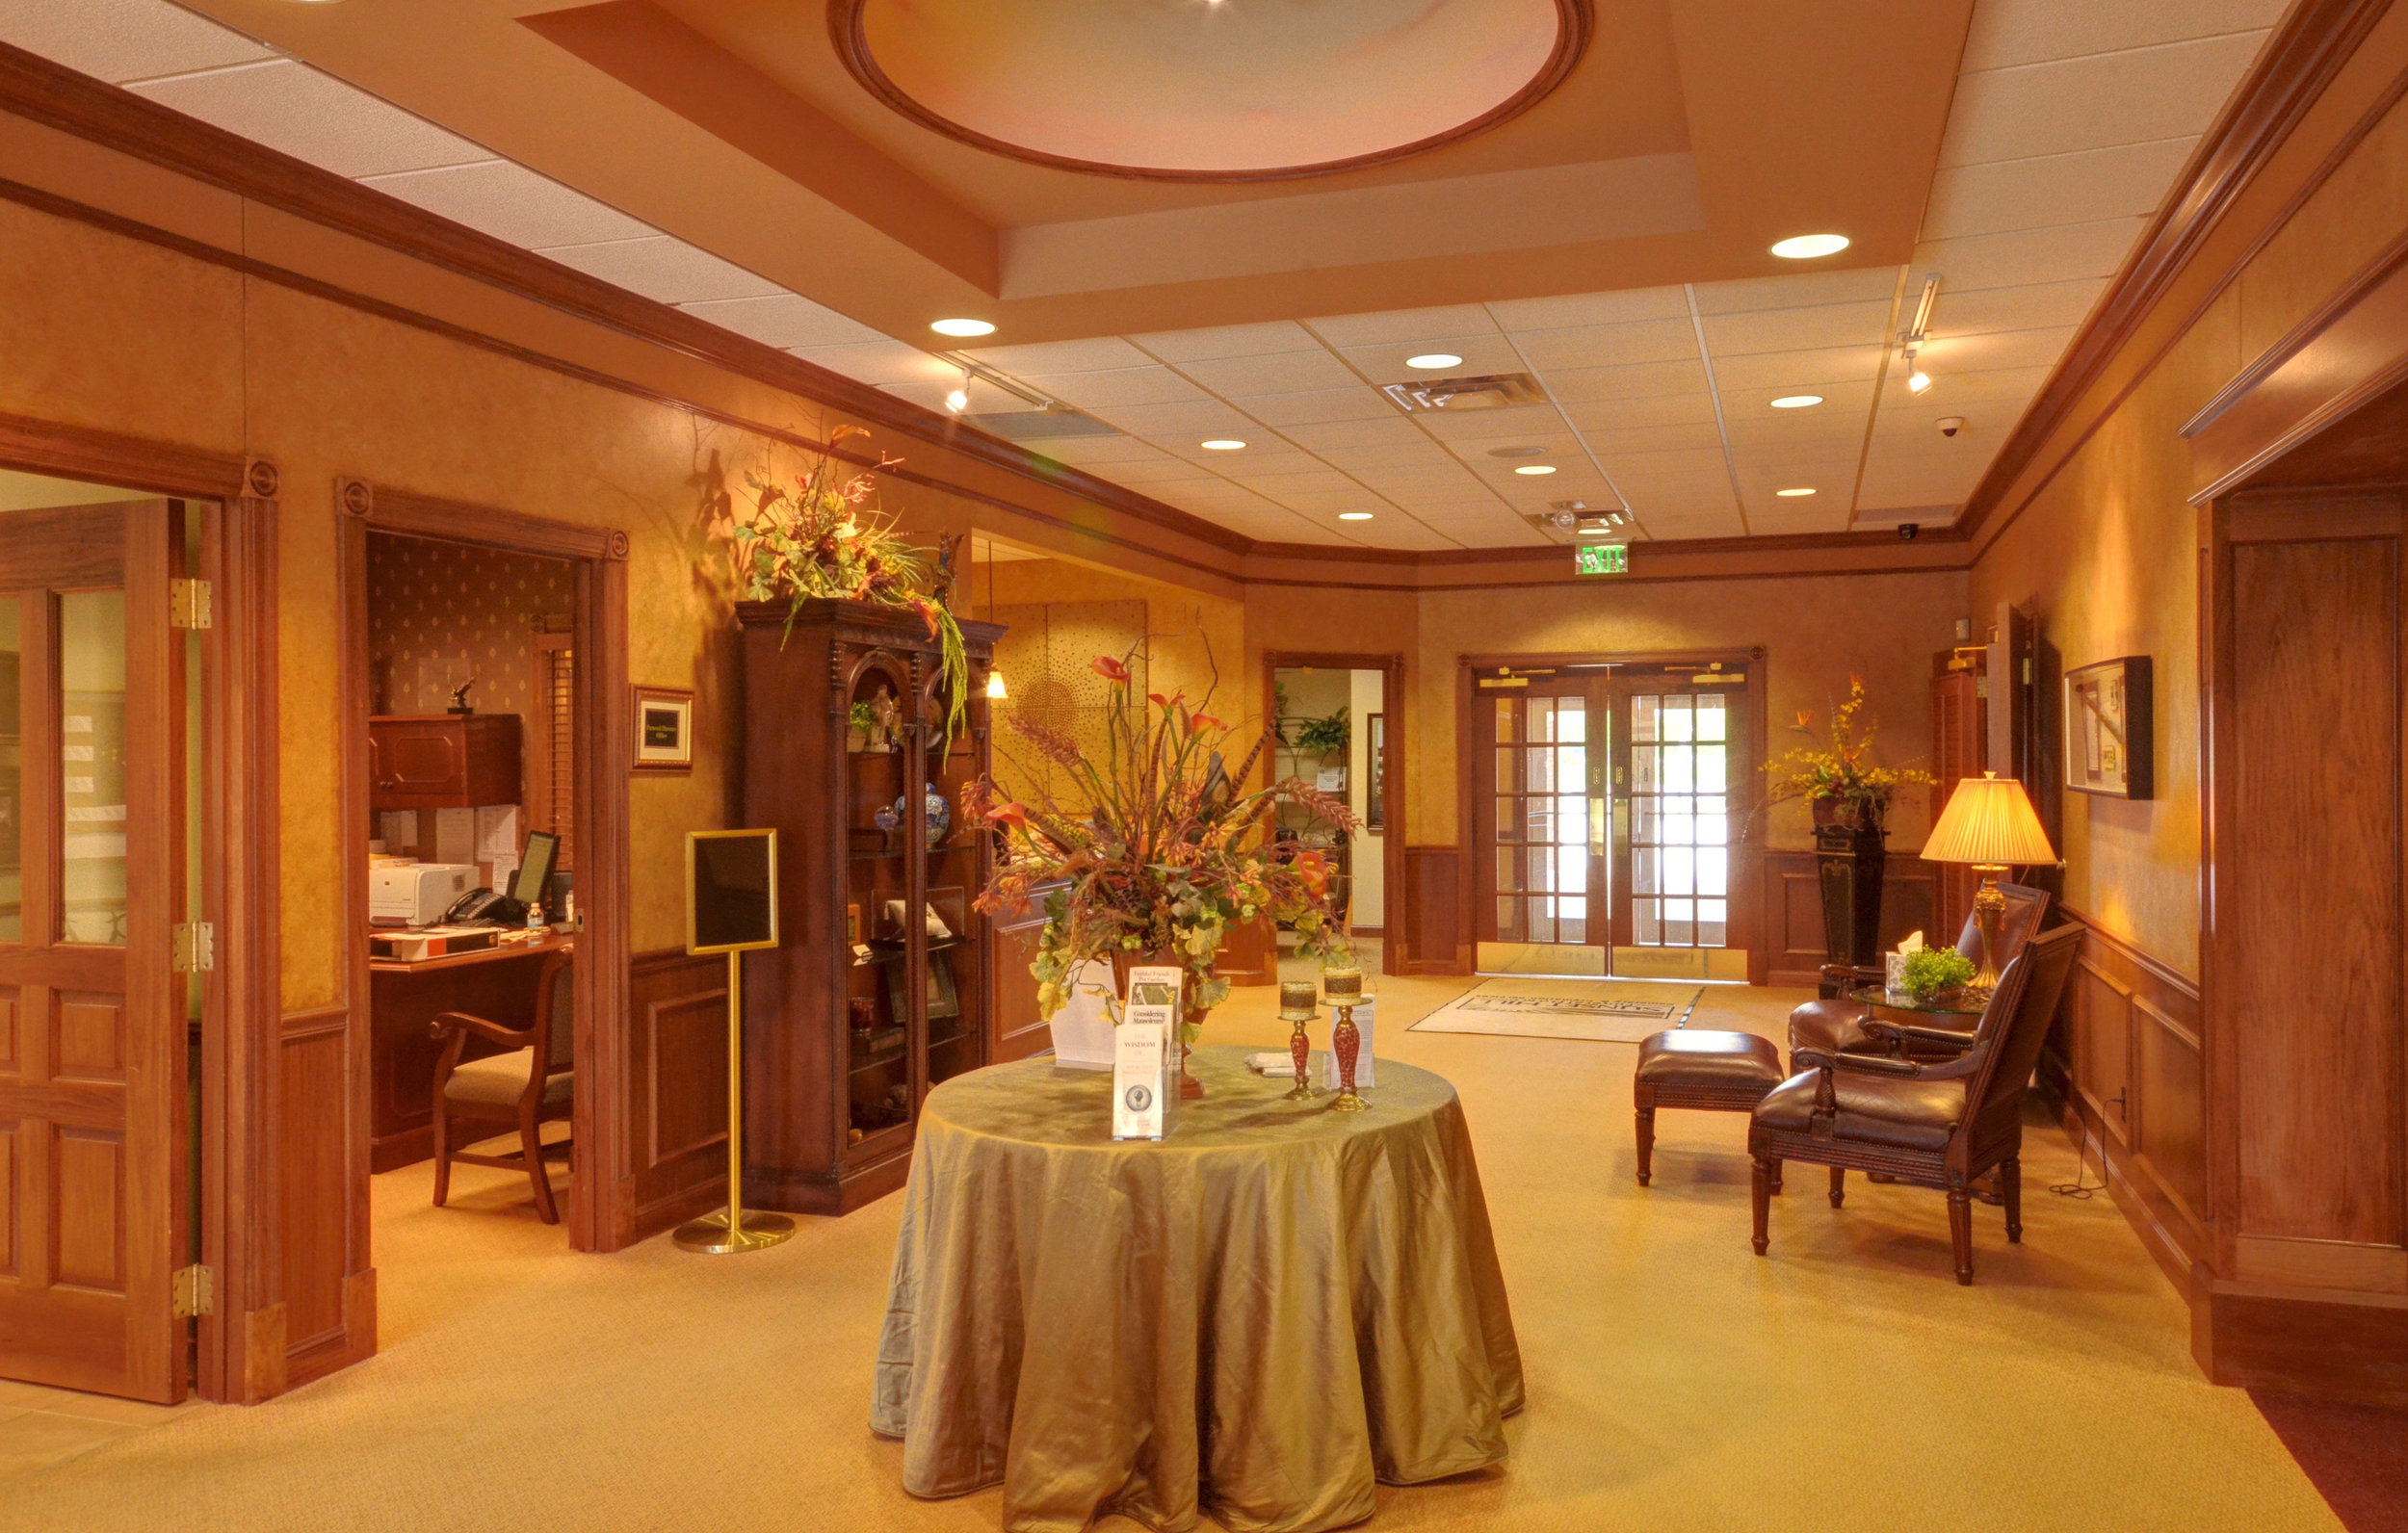 Sunset Hills Funeral Home Interior (Copy)